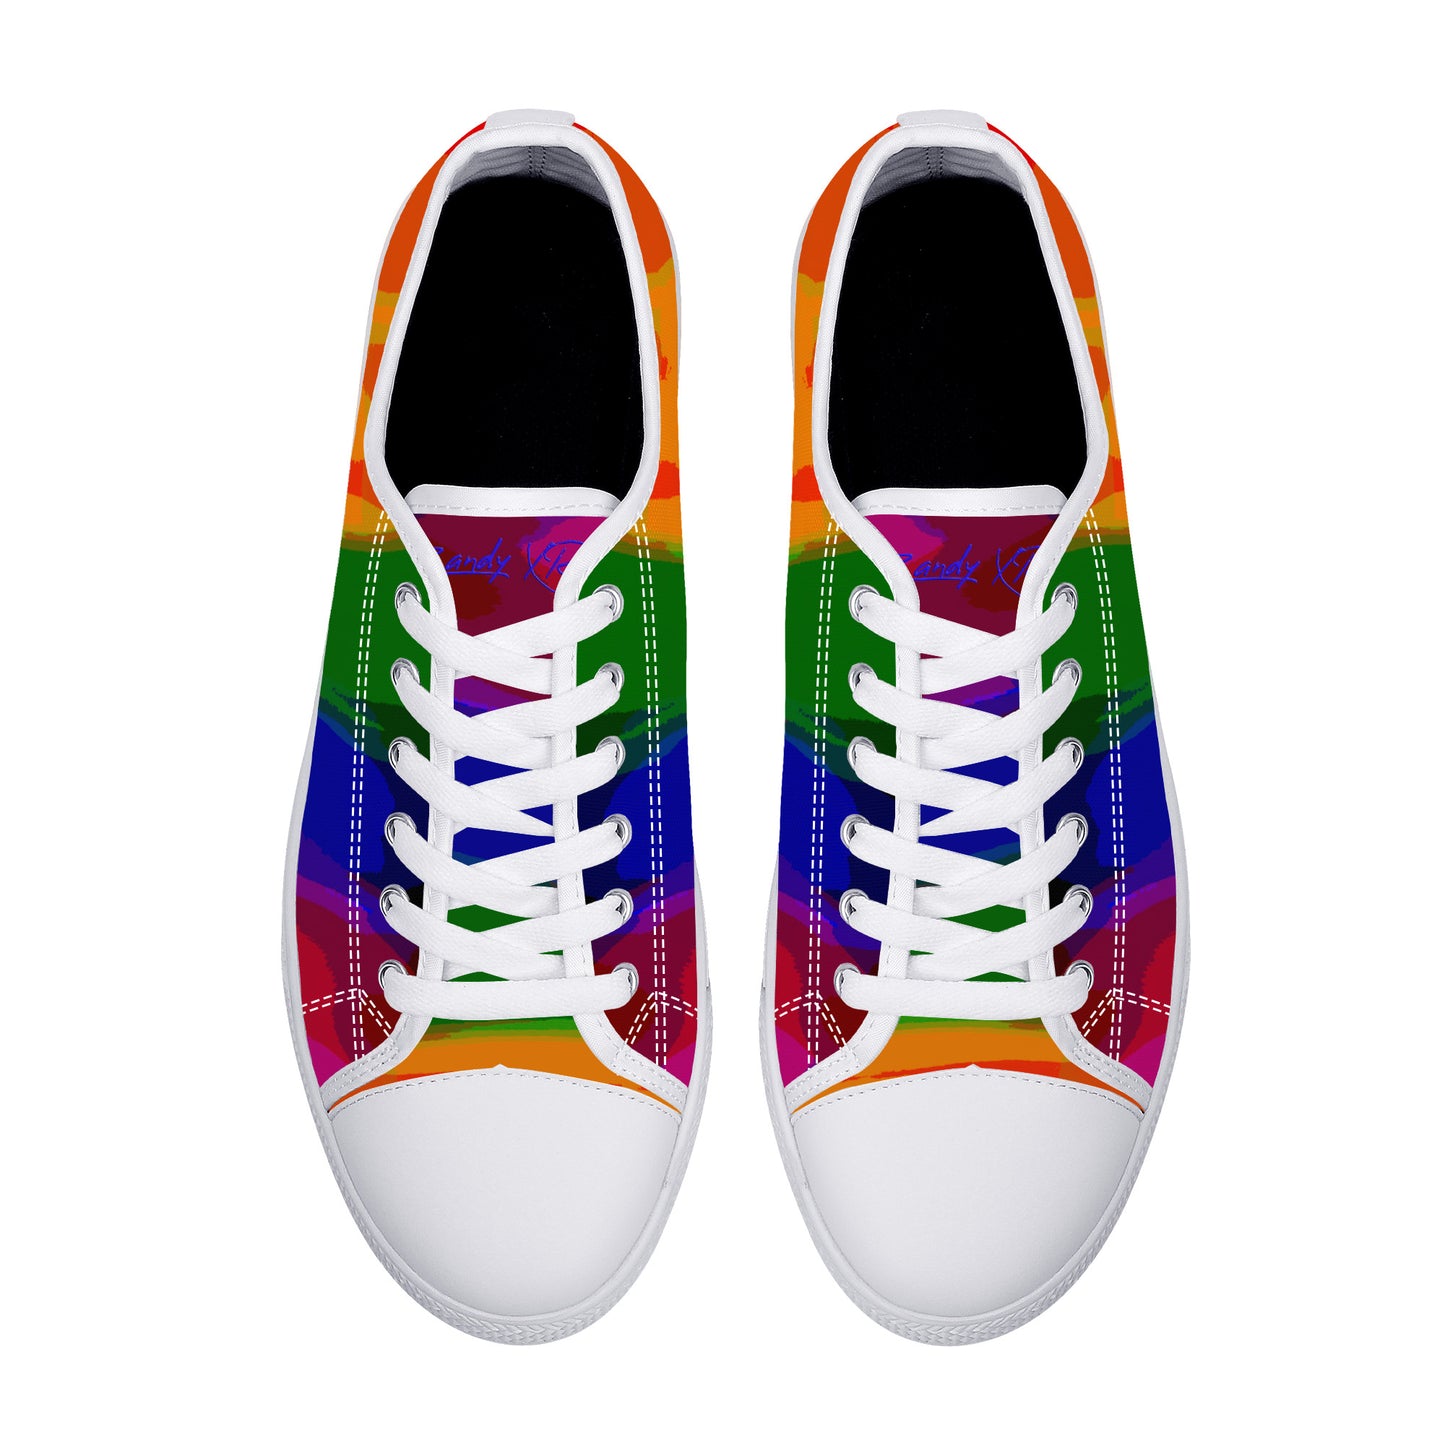 Casual Rainbow Low-Top Canvas Shoes- White